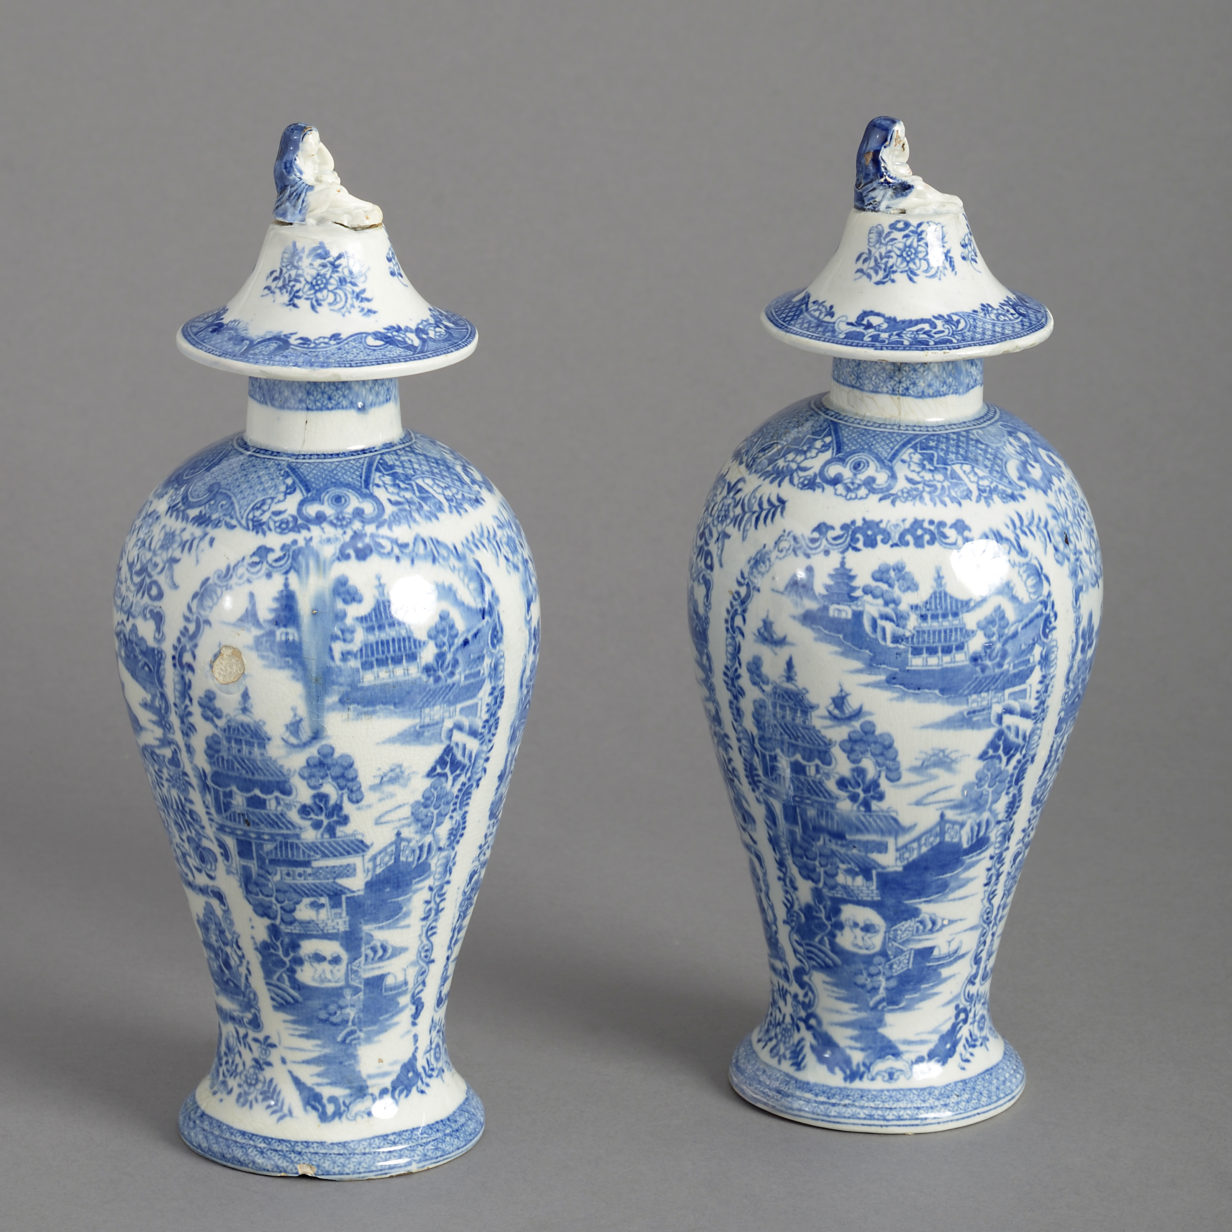 Pair of staffordshire vases